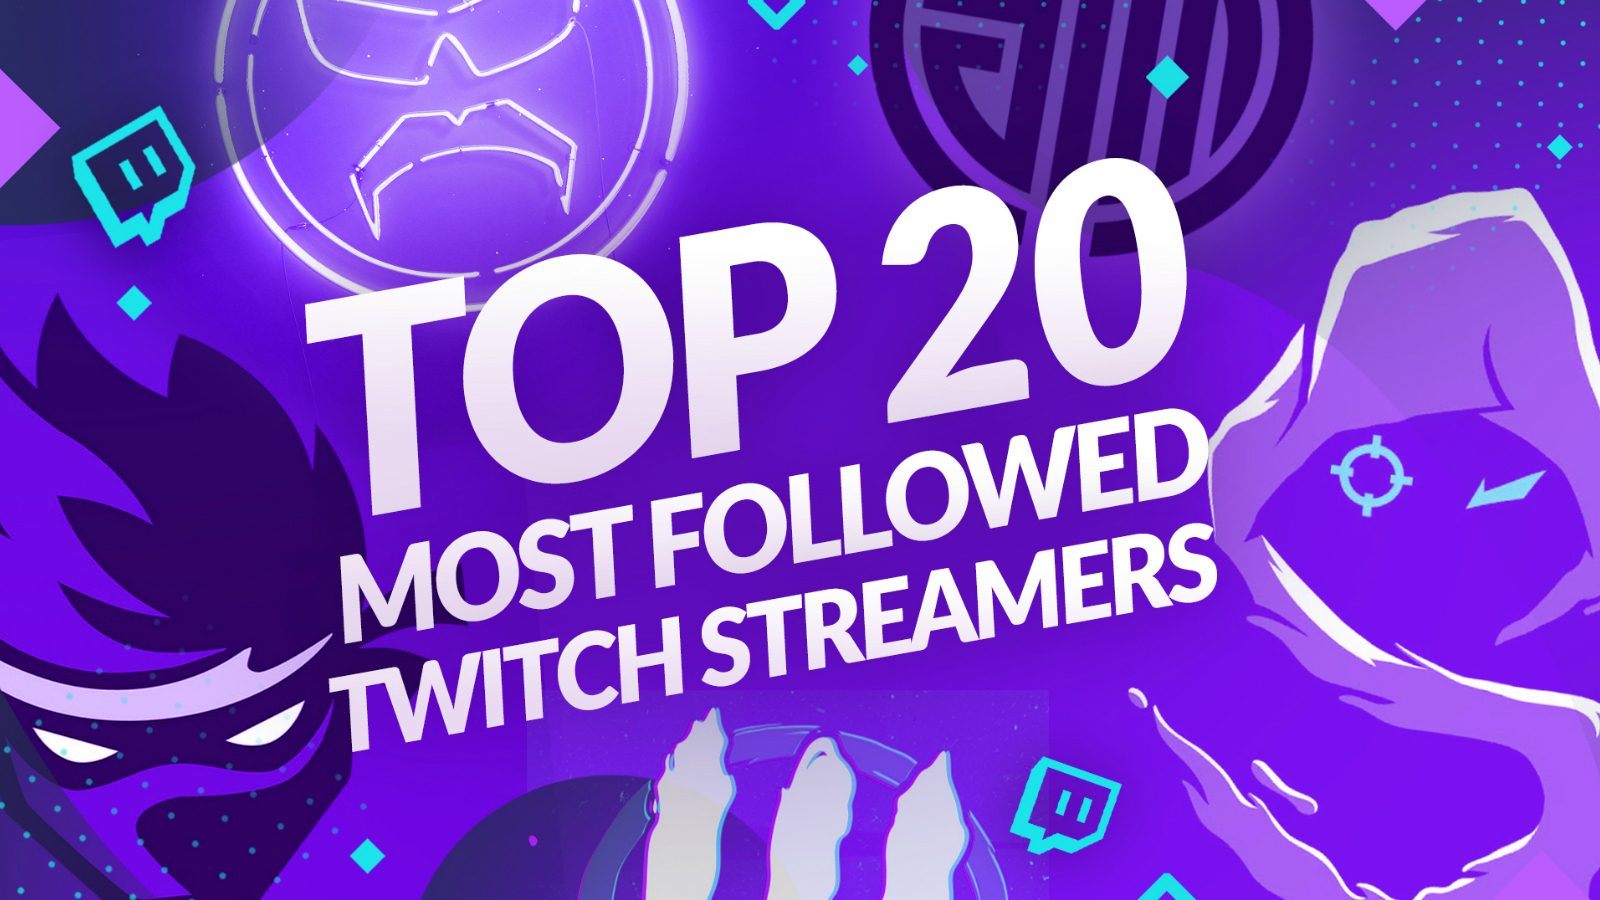 The Top 10 Twitch Streamers in November 2021